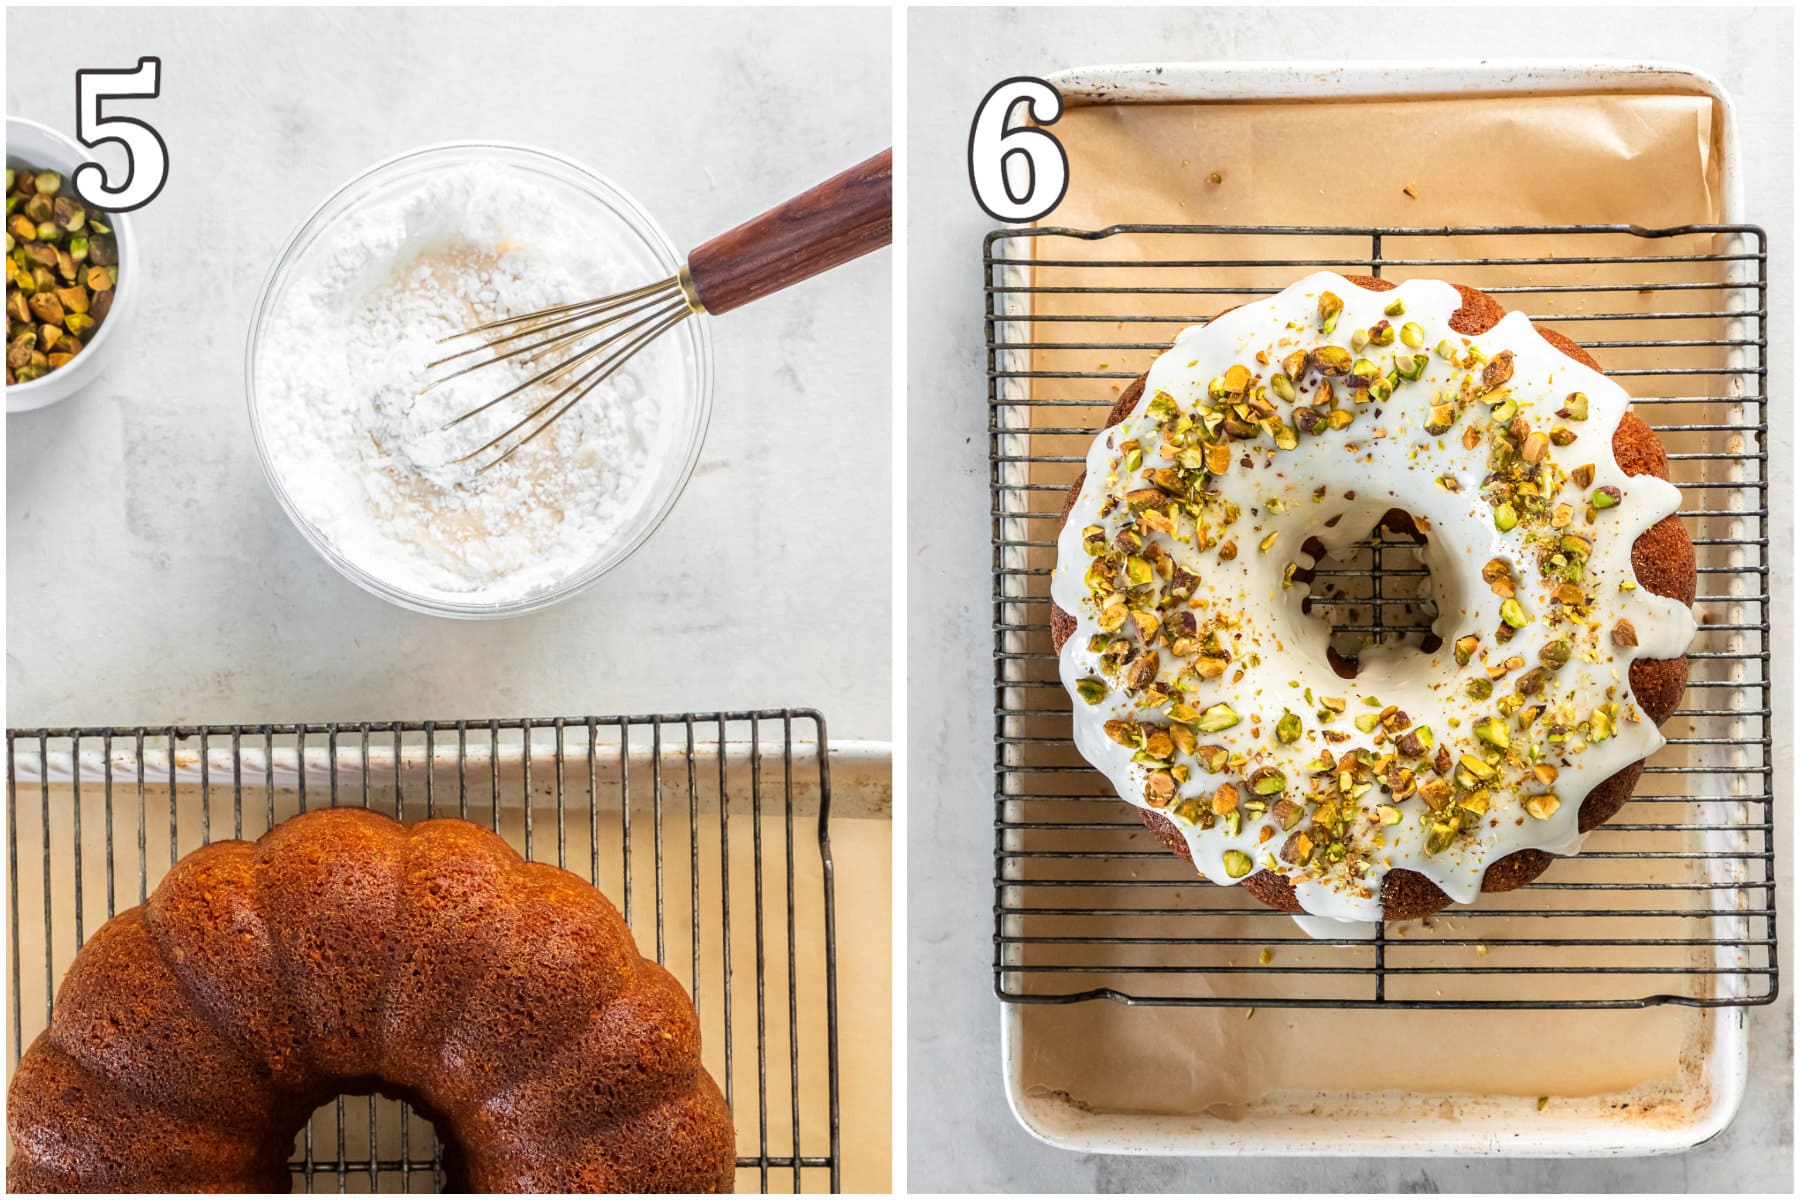 photo collage demonstrating how to make a simple glaze for bundt cake with pistachios.